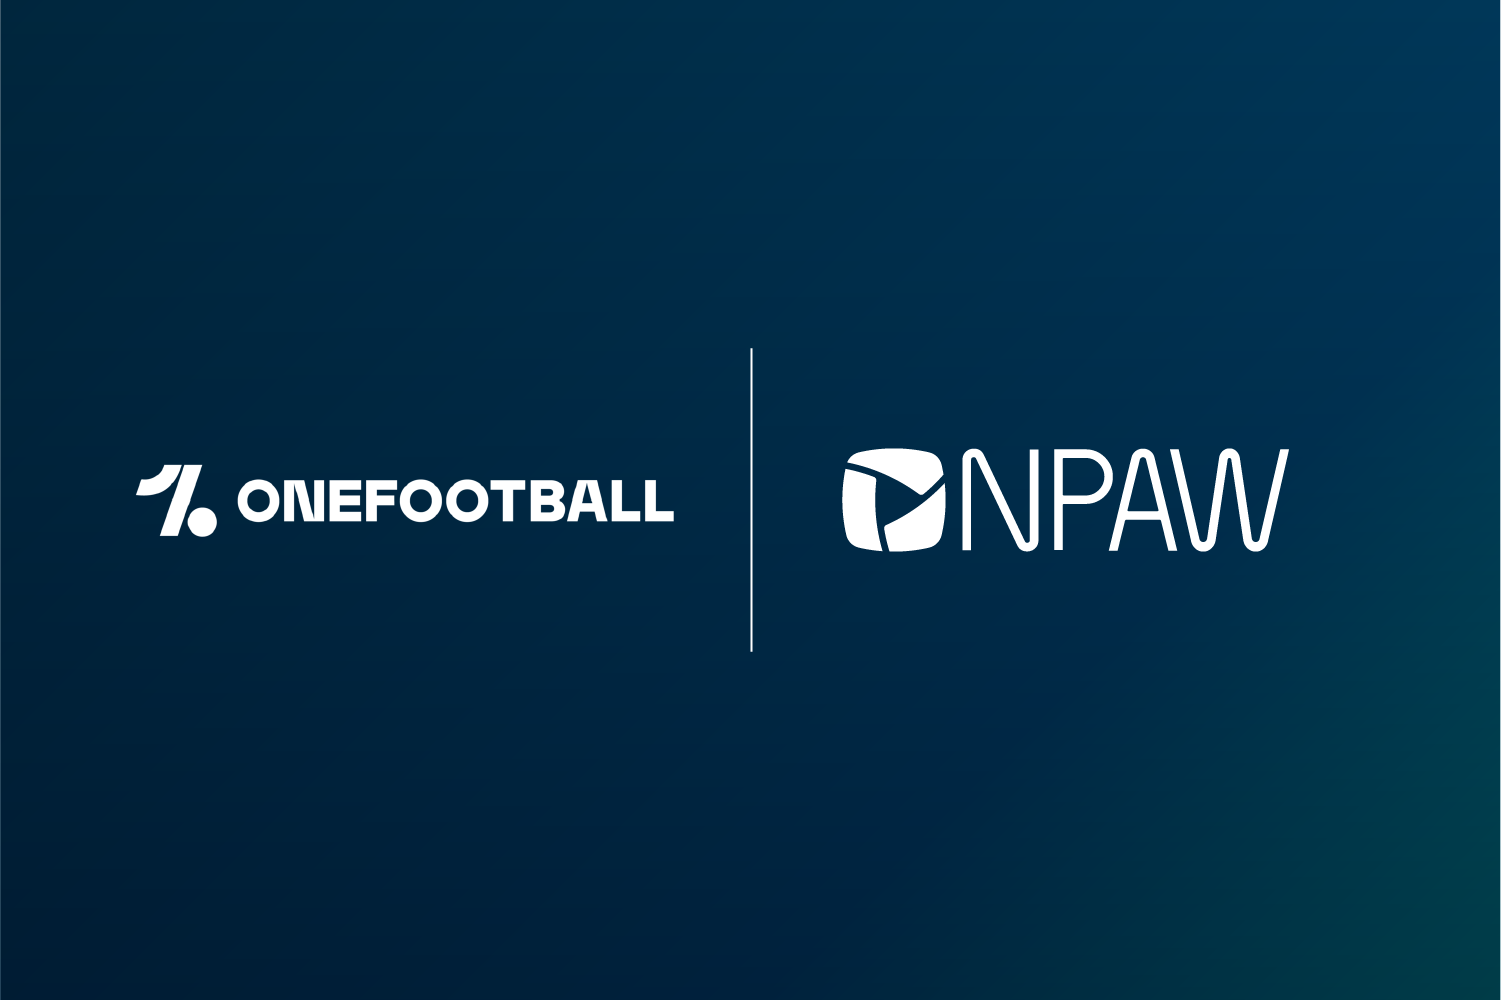 OneFootball Taps NPAW’s Advertising Analytics To Optimize Its Ad Strategy and Experience